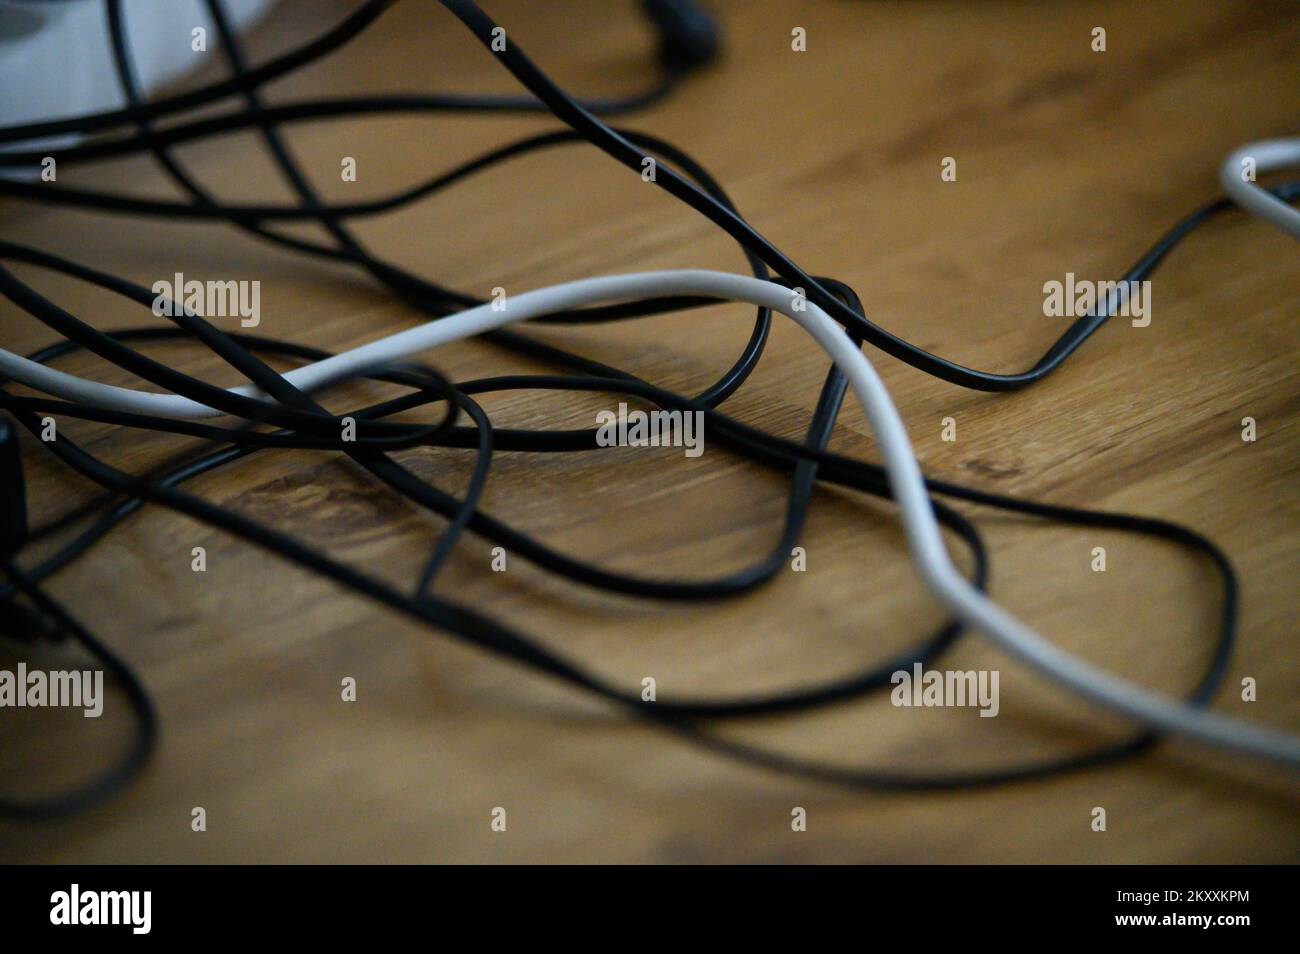 Cable chaos clutter from multiple electric wire extension cords and multi-contact plugs on wooden floor or table background Stock Photo